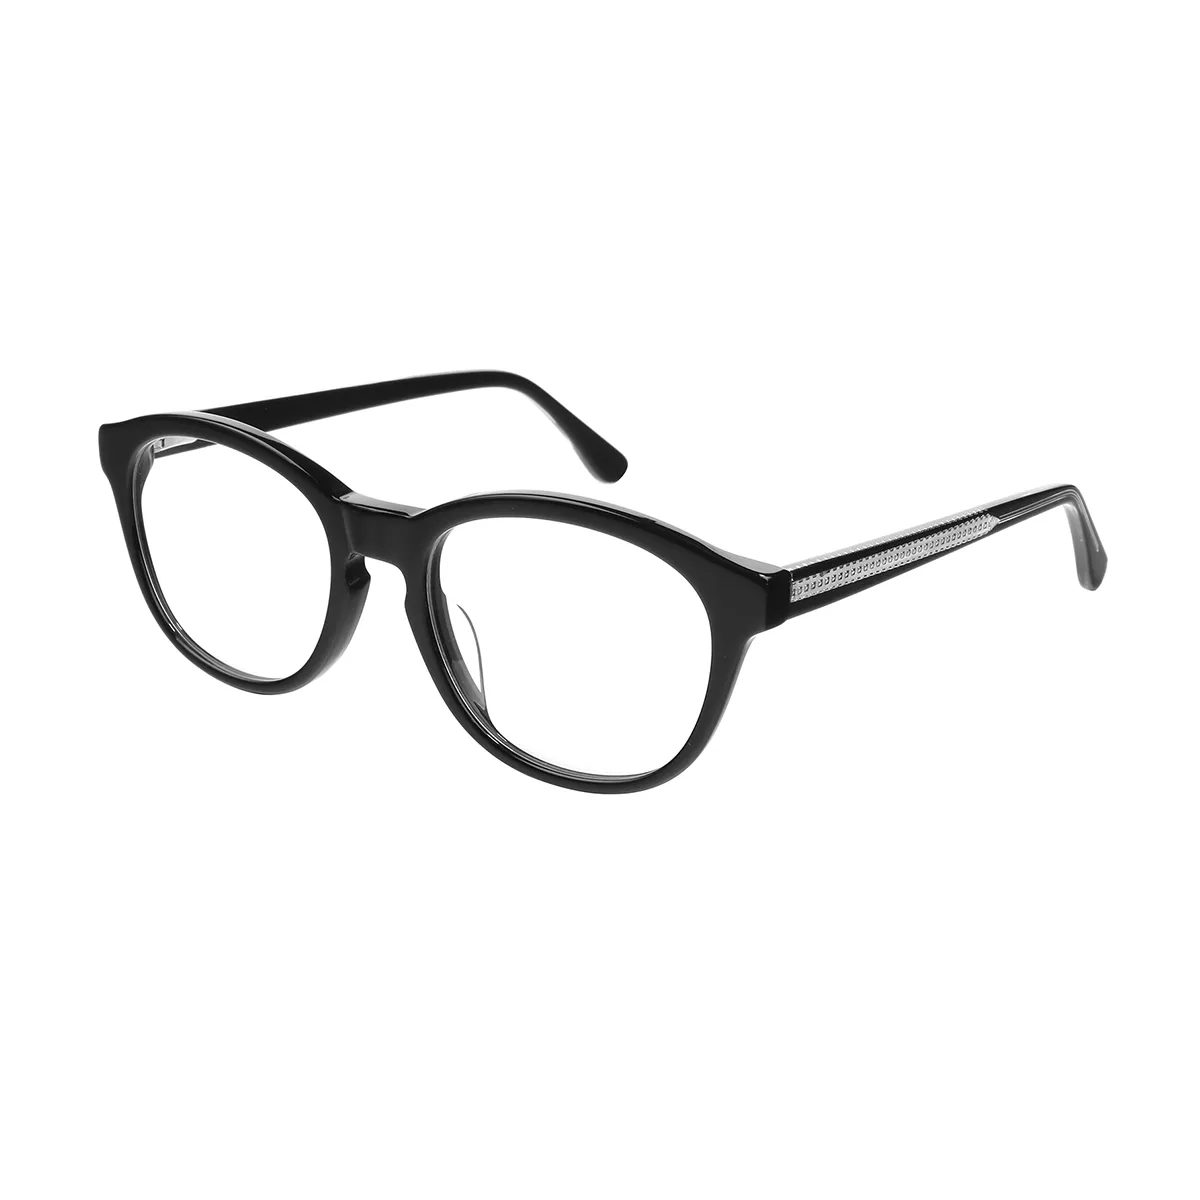 Angwin - Oval  Glasses for Men & Women